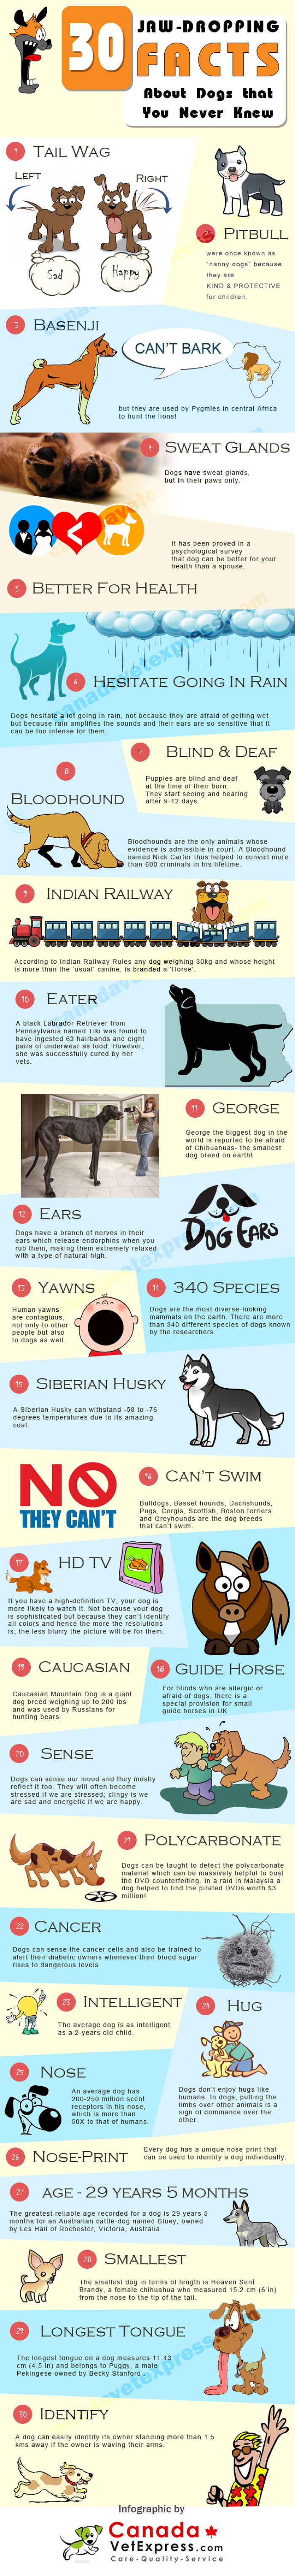 30 Facts About Dogs You Have Probably Never Heard Before